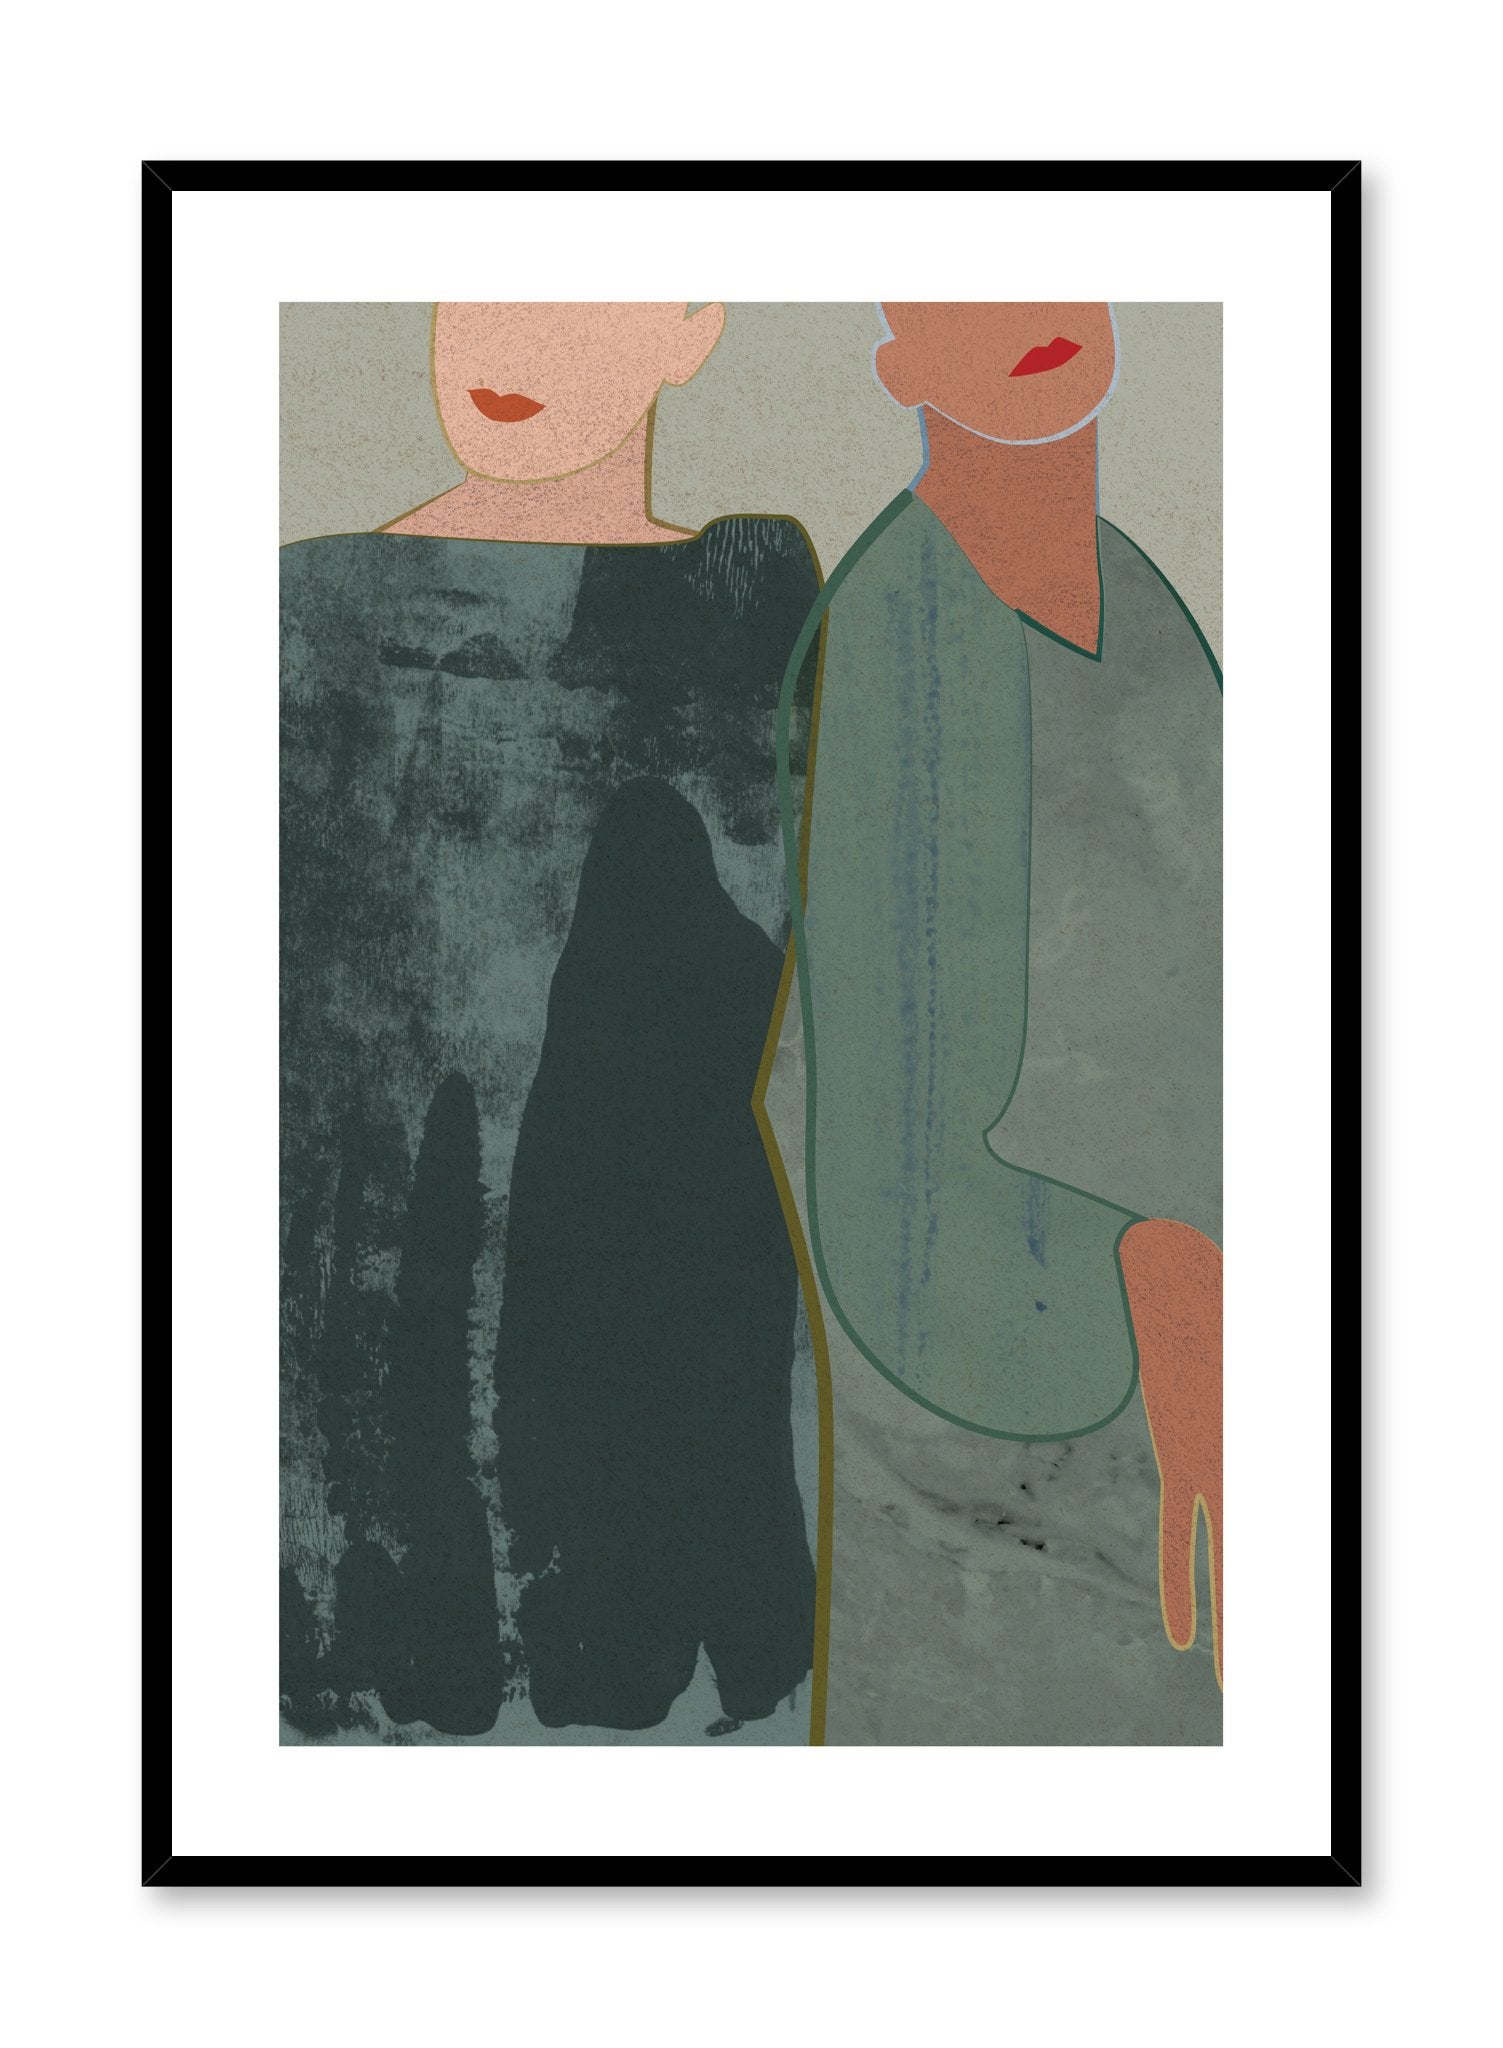 Fashion illustration poster by Opposite Wall with drawing of two woman Socialites